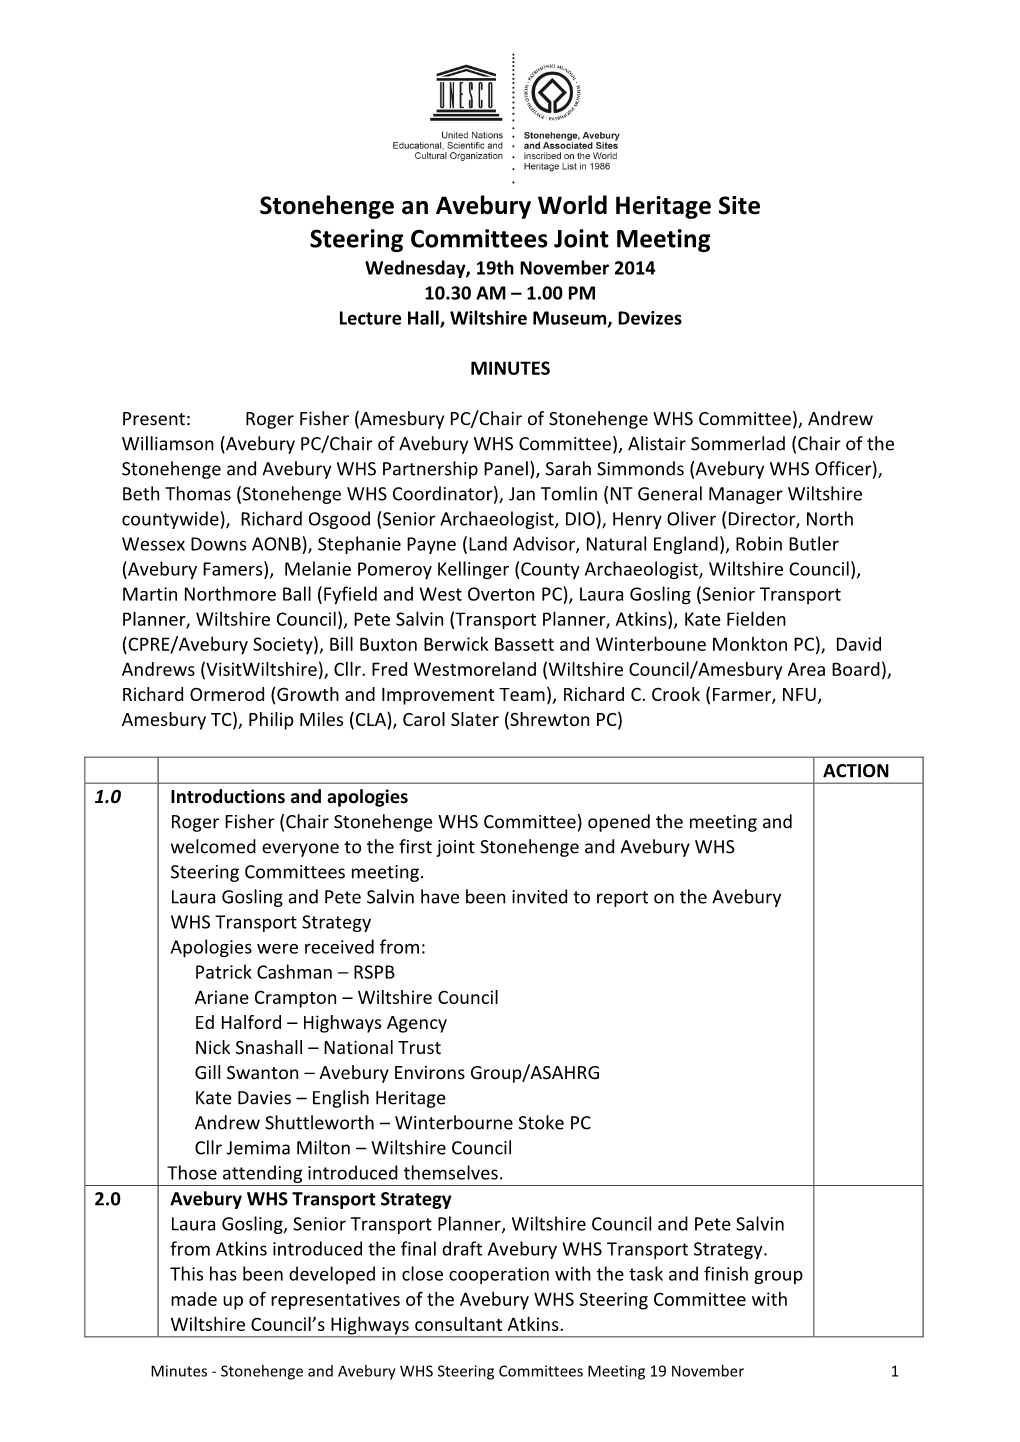 Stonehenge and Avebury Joint Steering Committee Minutes